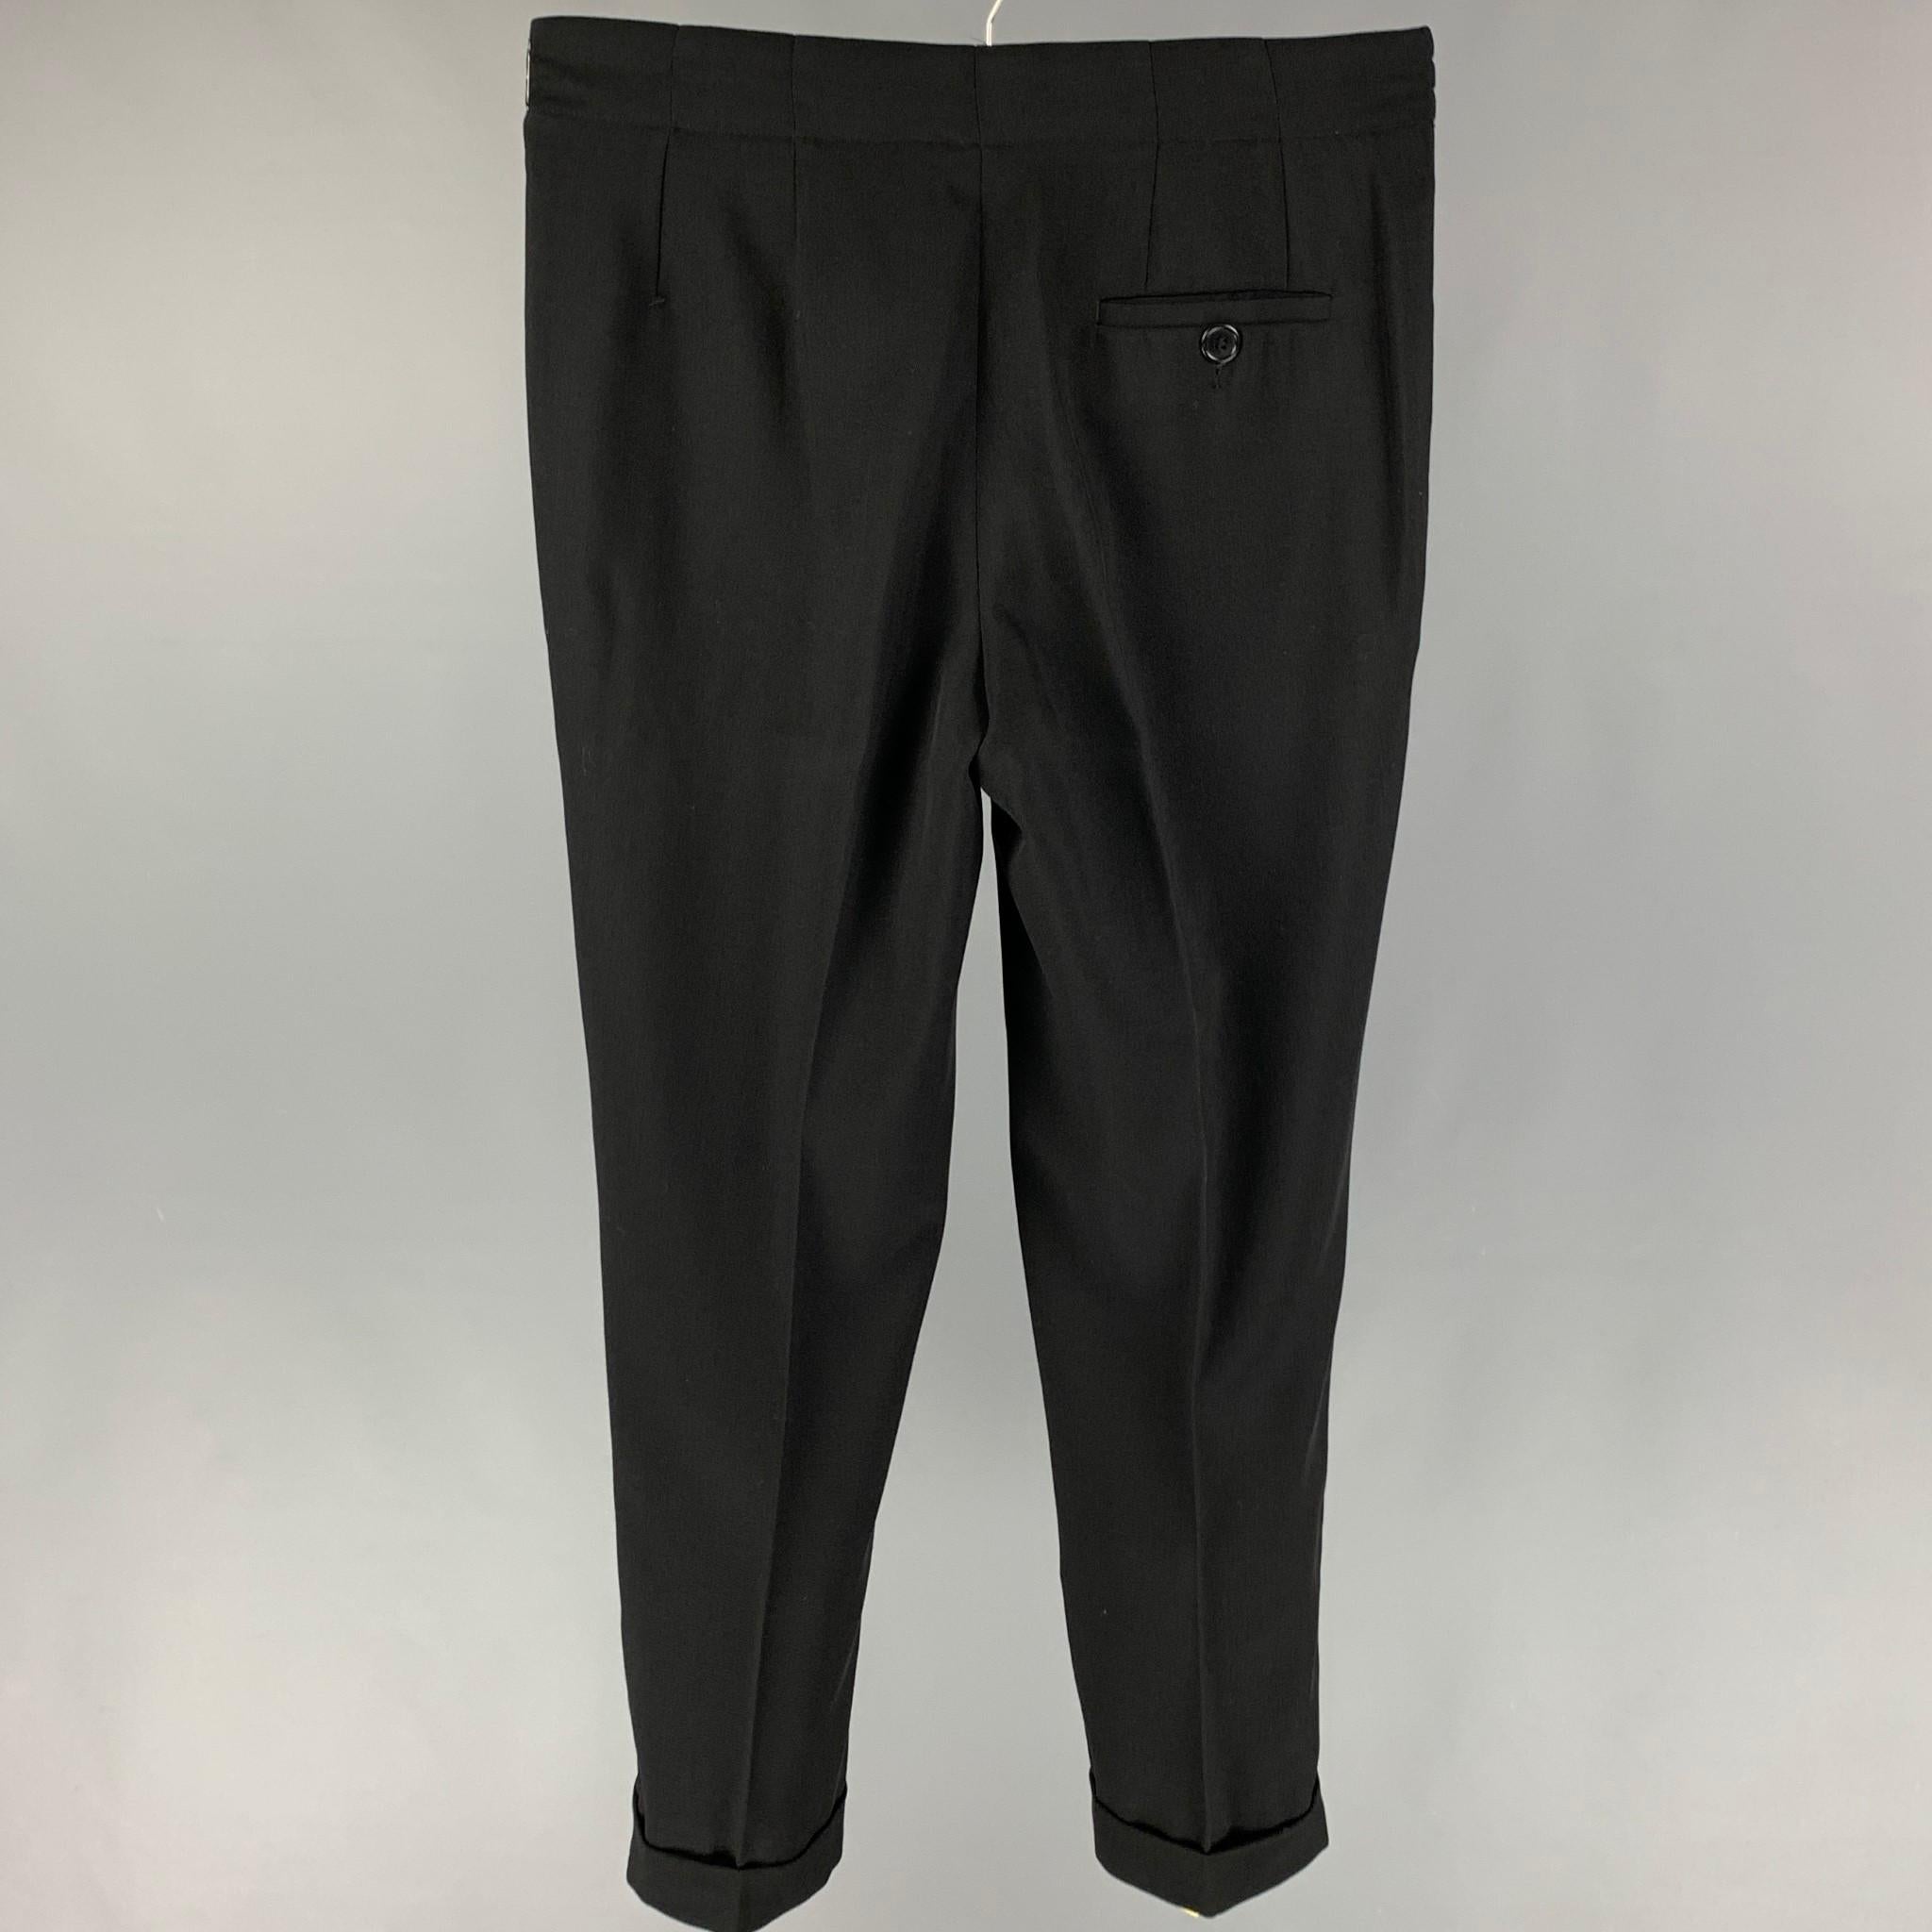 DIRK BIKKEMBERGS dress pants comes in a black rayon featuring a cuffed leg, flat front, drawstring, and a zip fly closure. Made in Italy. 

Very Good Pre-Owned Condition.
Marked: 48

Measurements:

Waist: 32 in.
Rise: 11.5 in.
Inseam: 30 in.